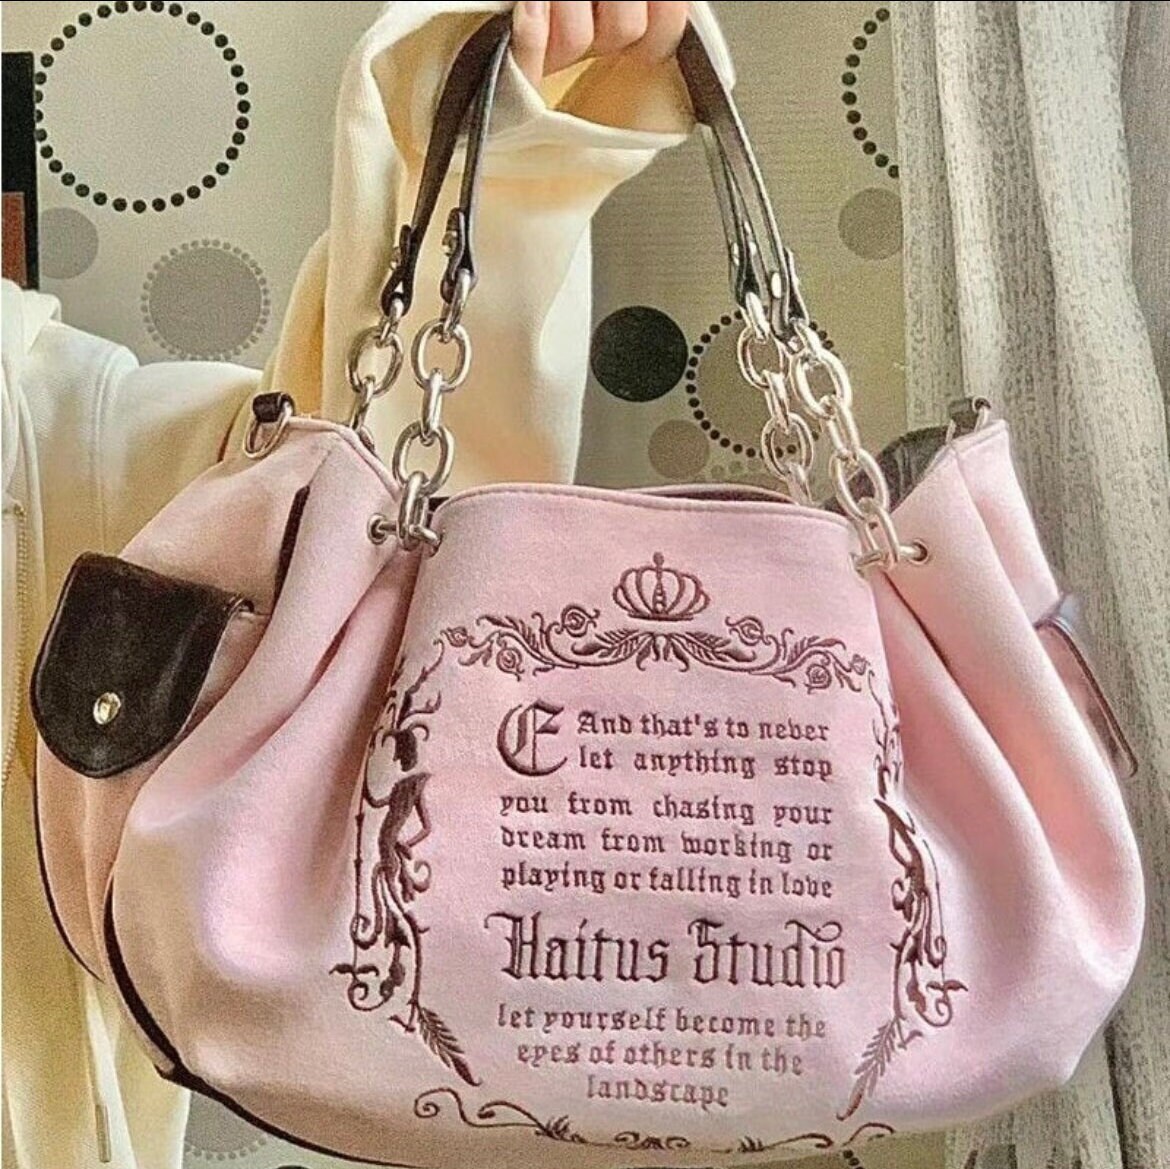 Juicy Couture Hobo Handbag Baby Pink Velour Plaid and Leather Y2K